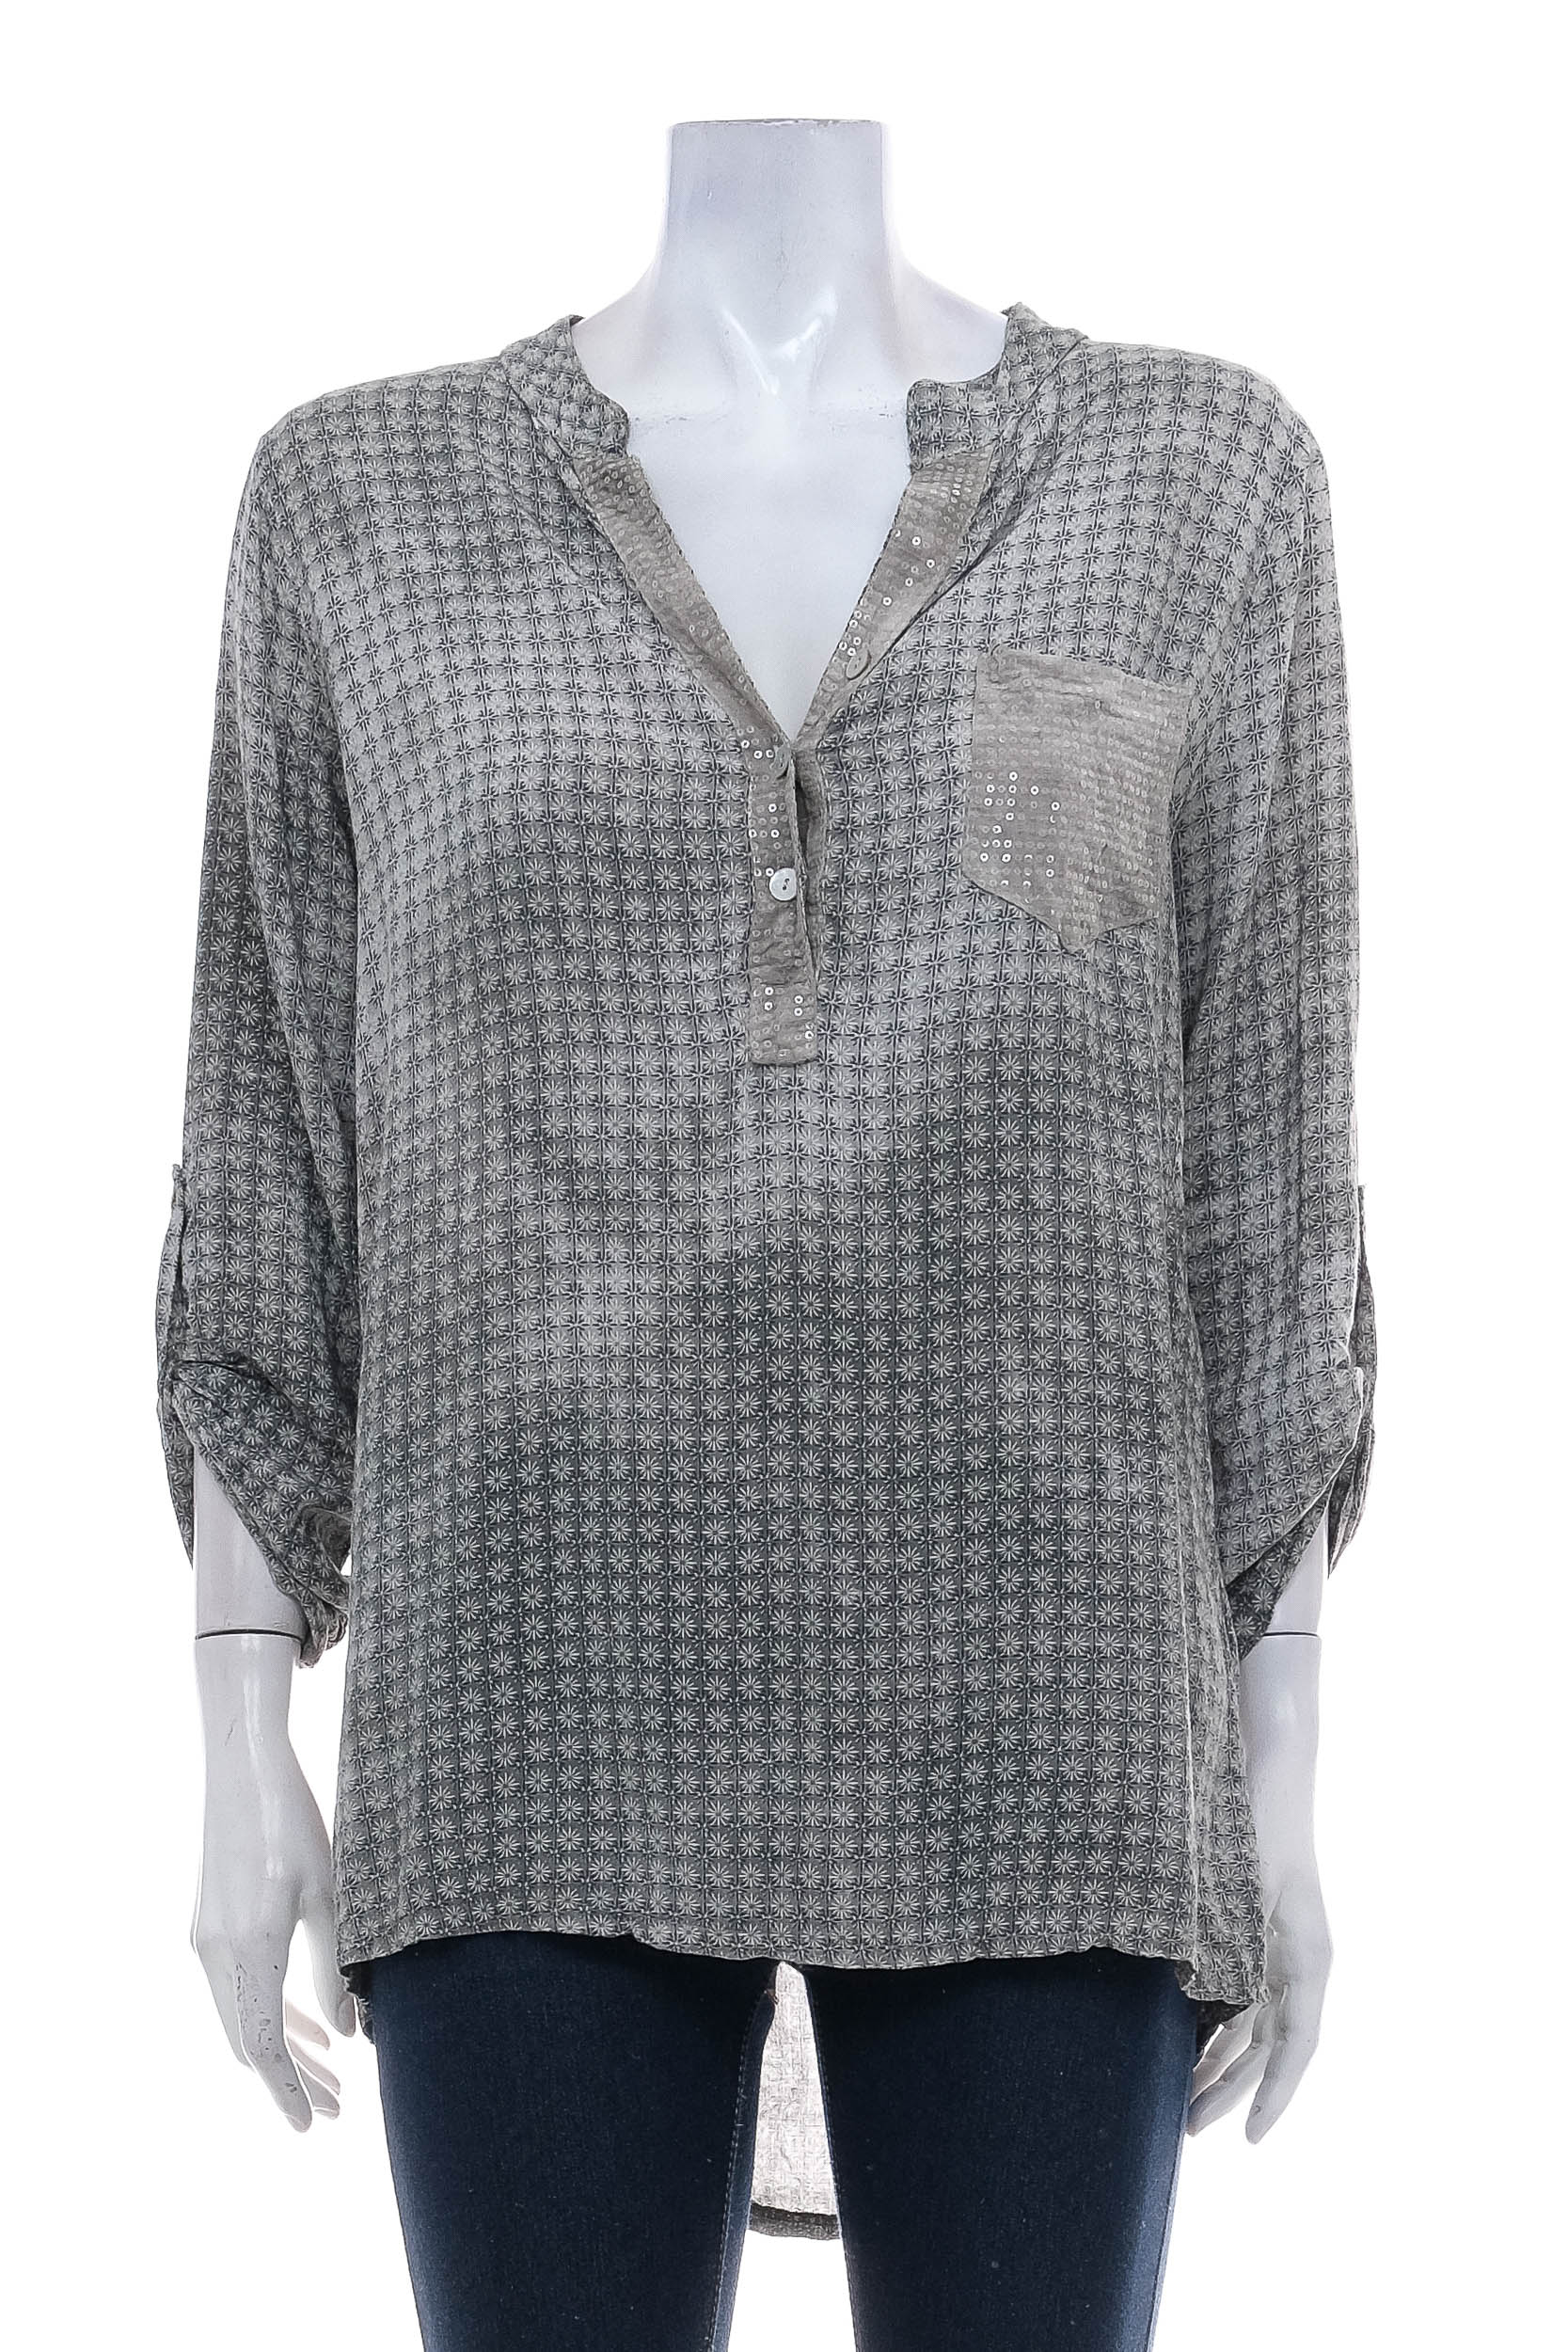 Women's shirt - Made in Italy - 0